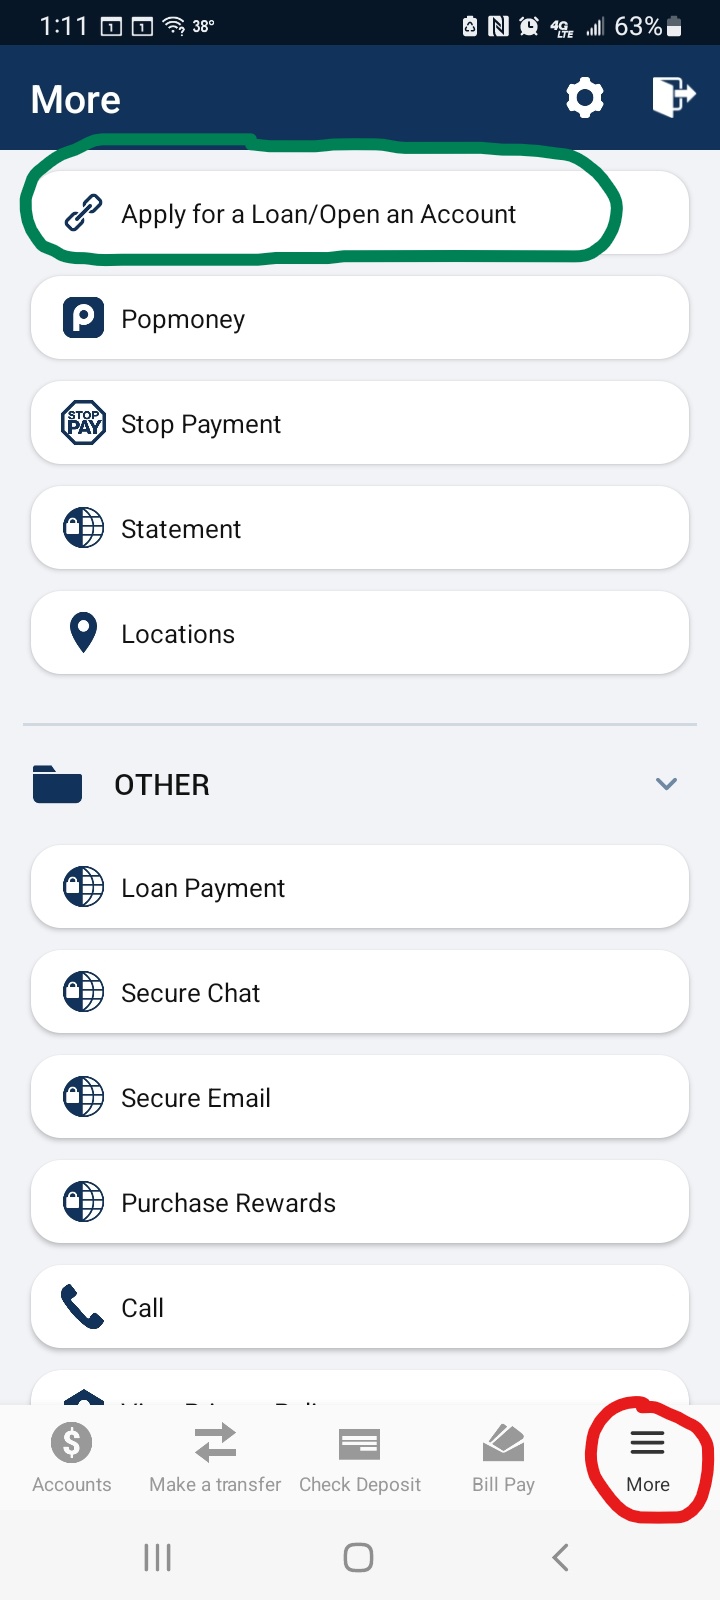 Apply for a loan on Mobile Banking